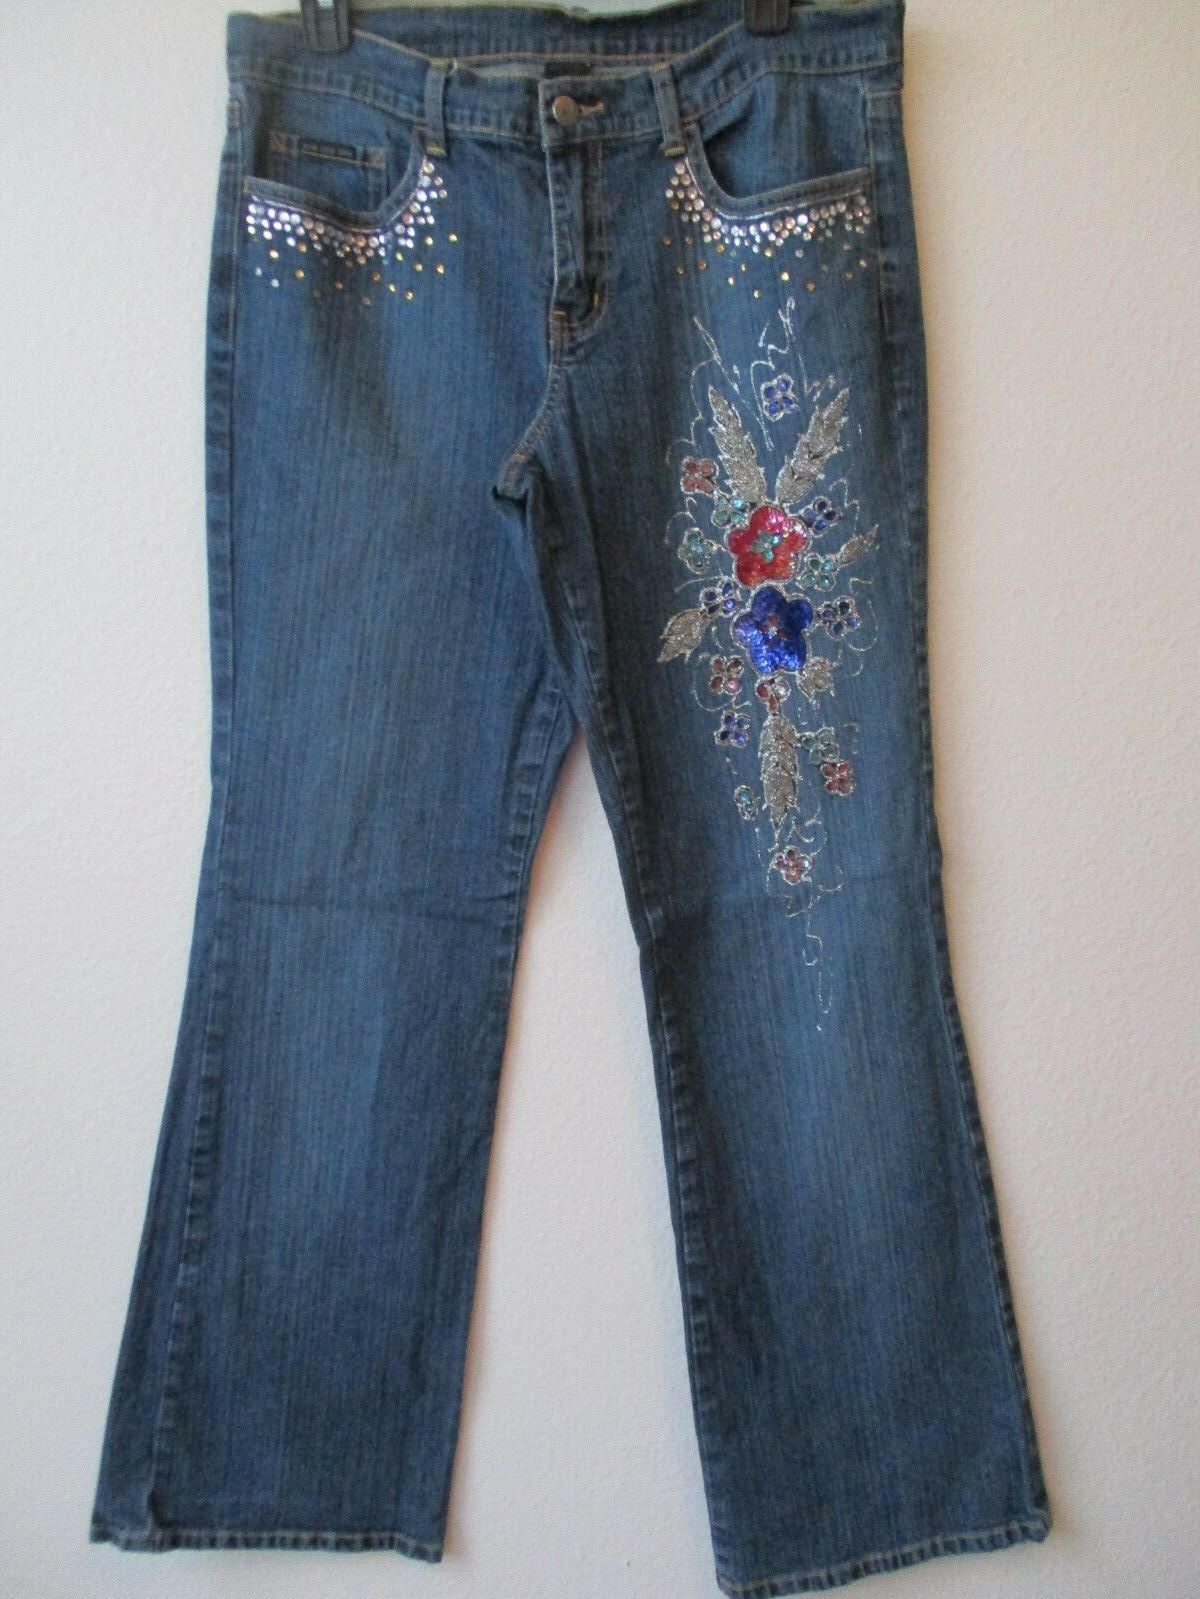 NY JEANS DENIM BLUE EMBELLISHED Our shop OFFers the best service - Industry No. 1 NEW SIZE 10